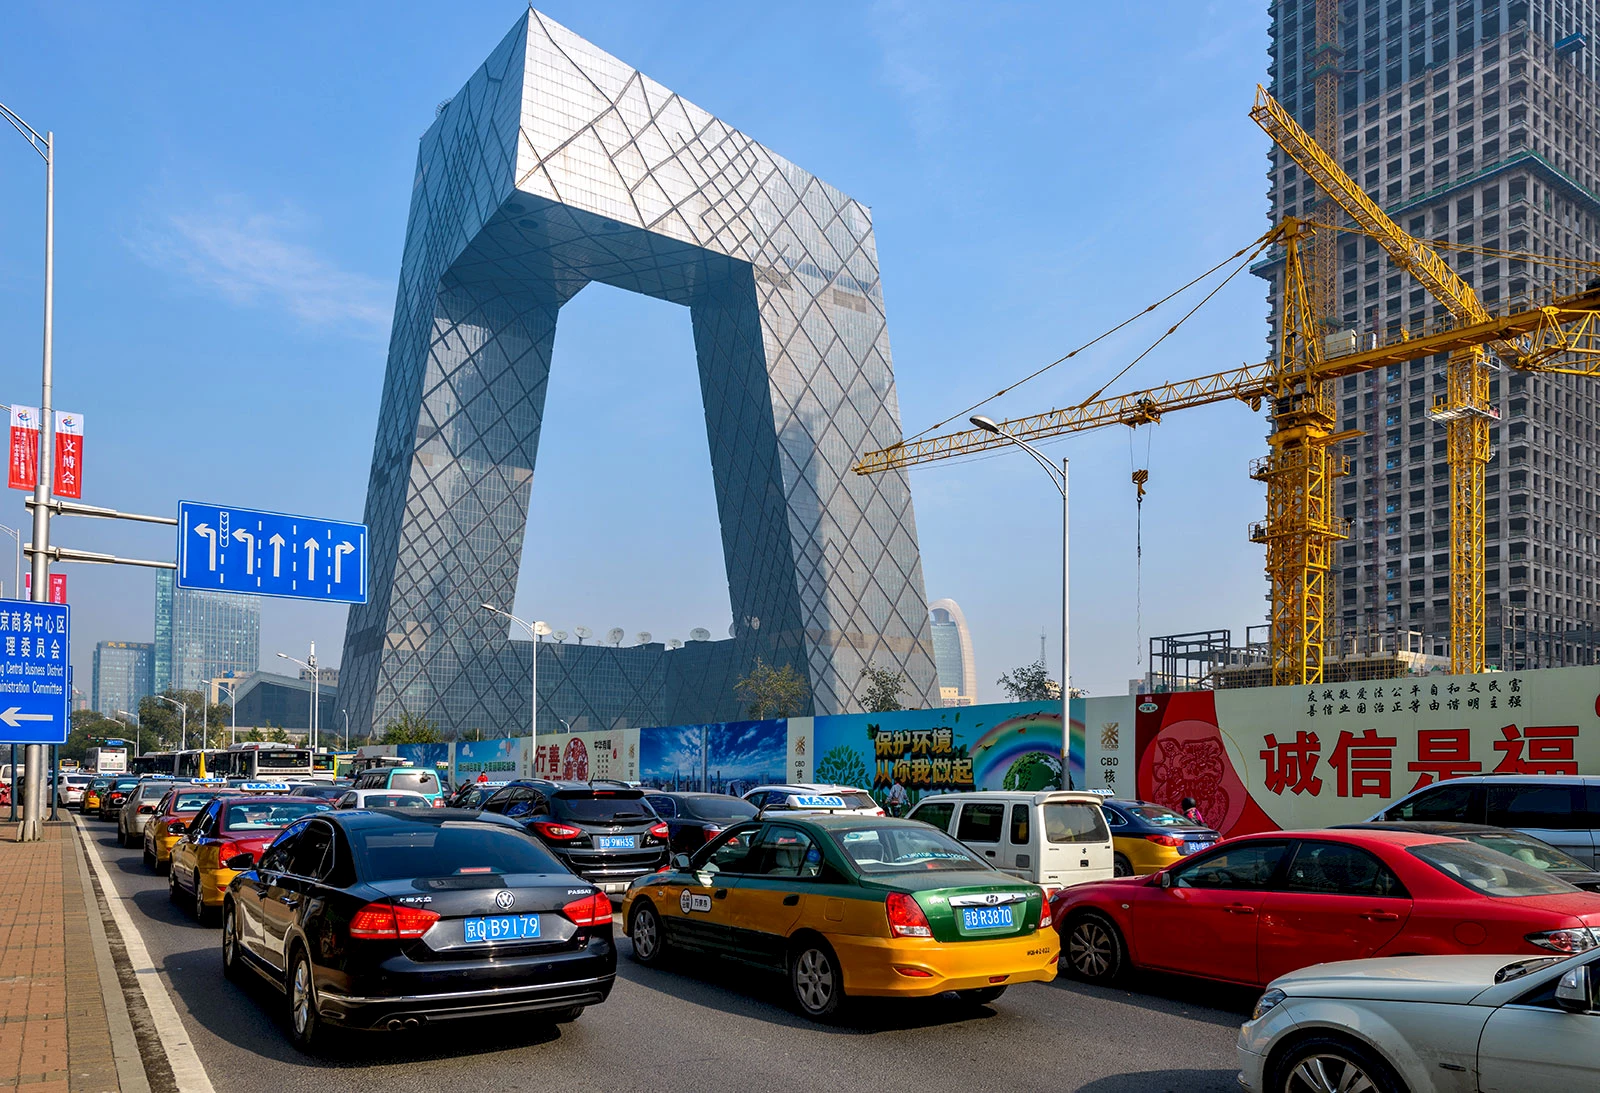 China Central Television (CCTV) Headquarters in Beijing.